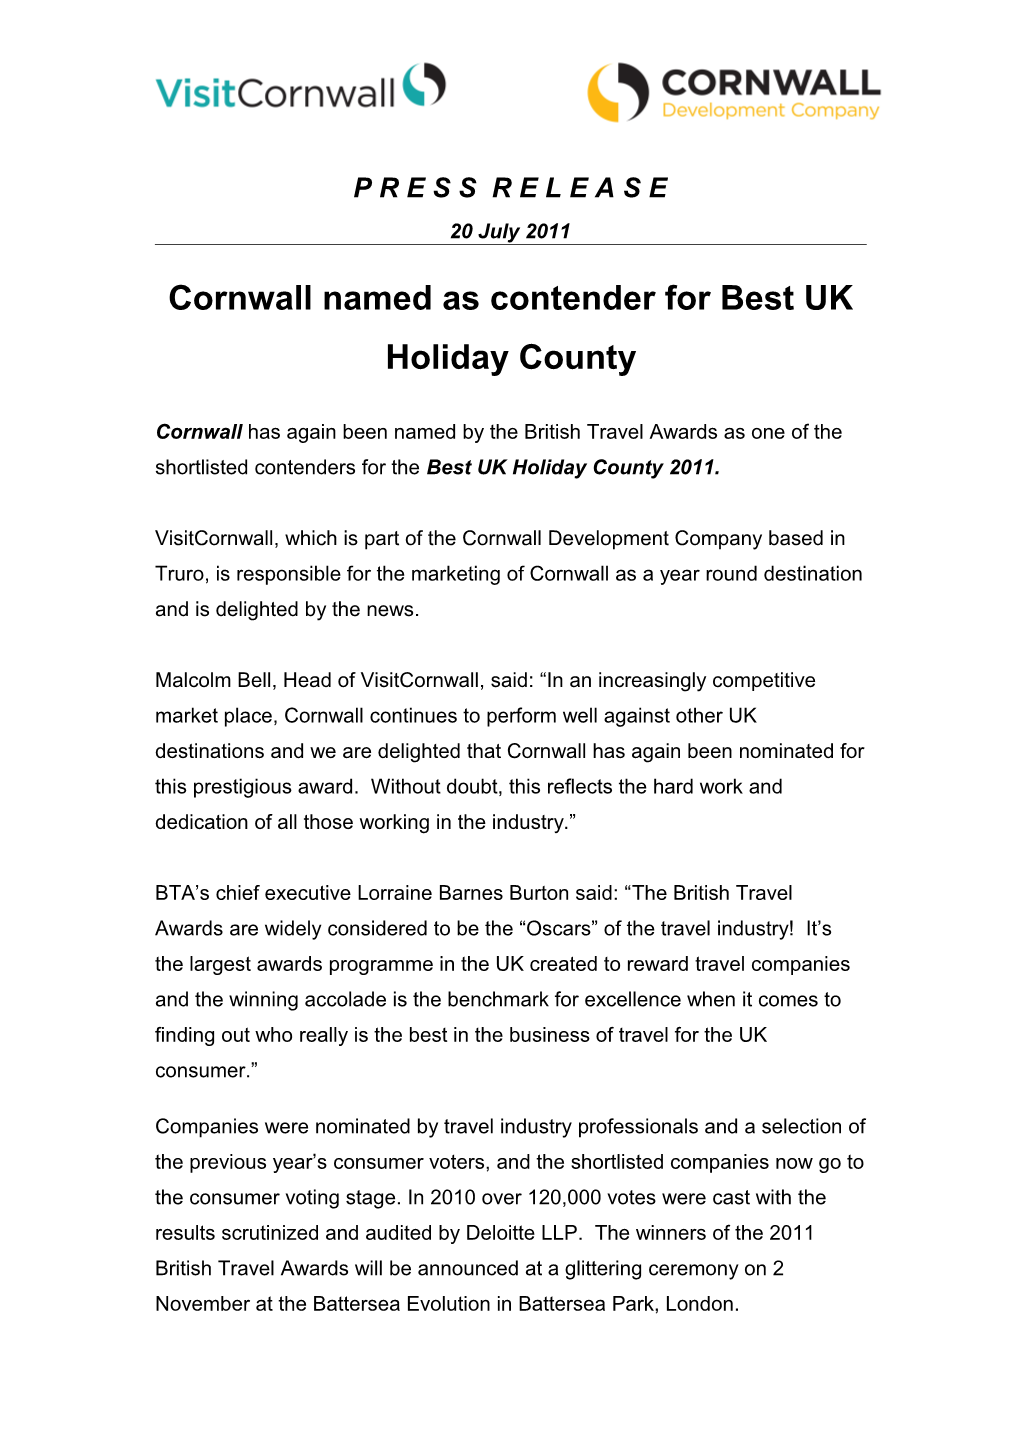 Cornwall Named As Contender for Best UK Holiday County